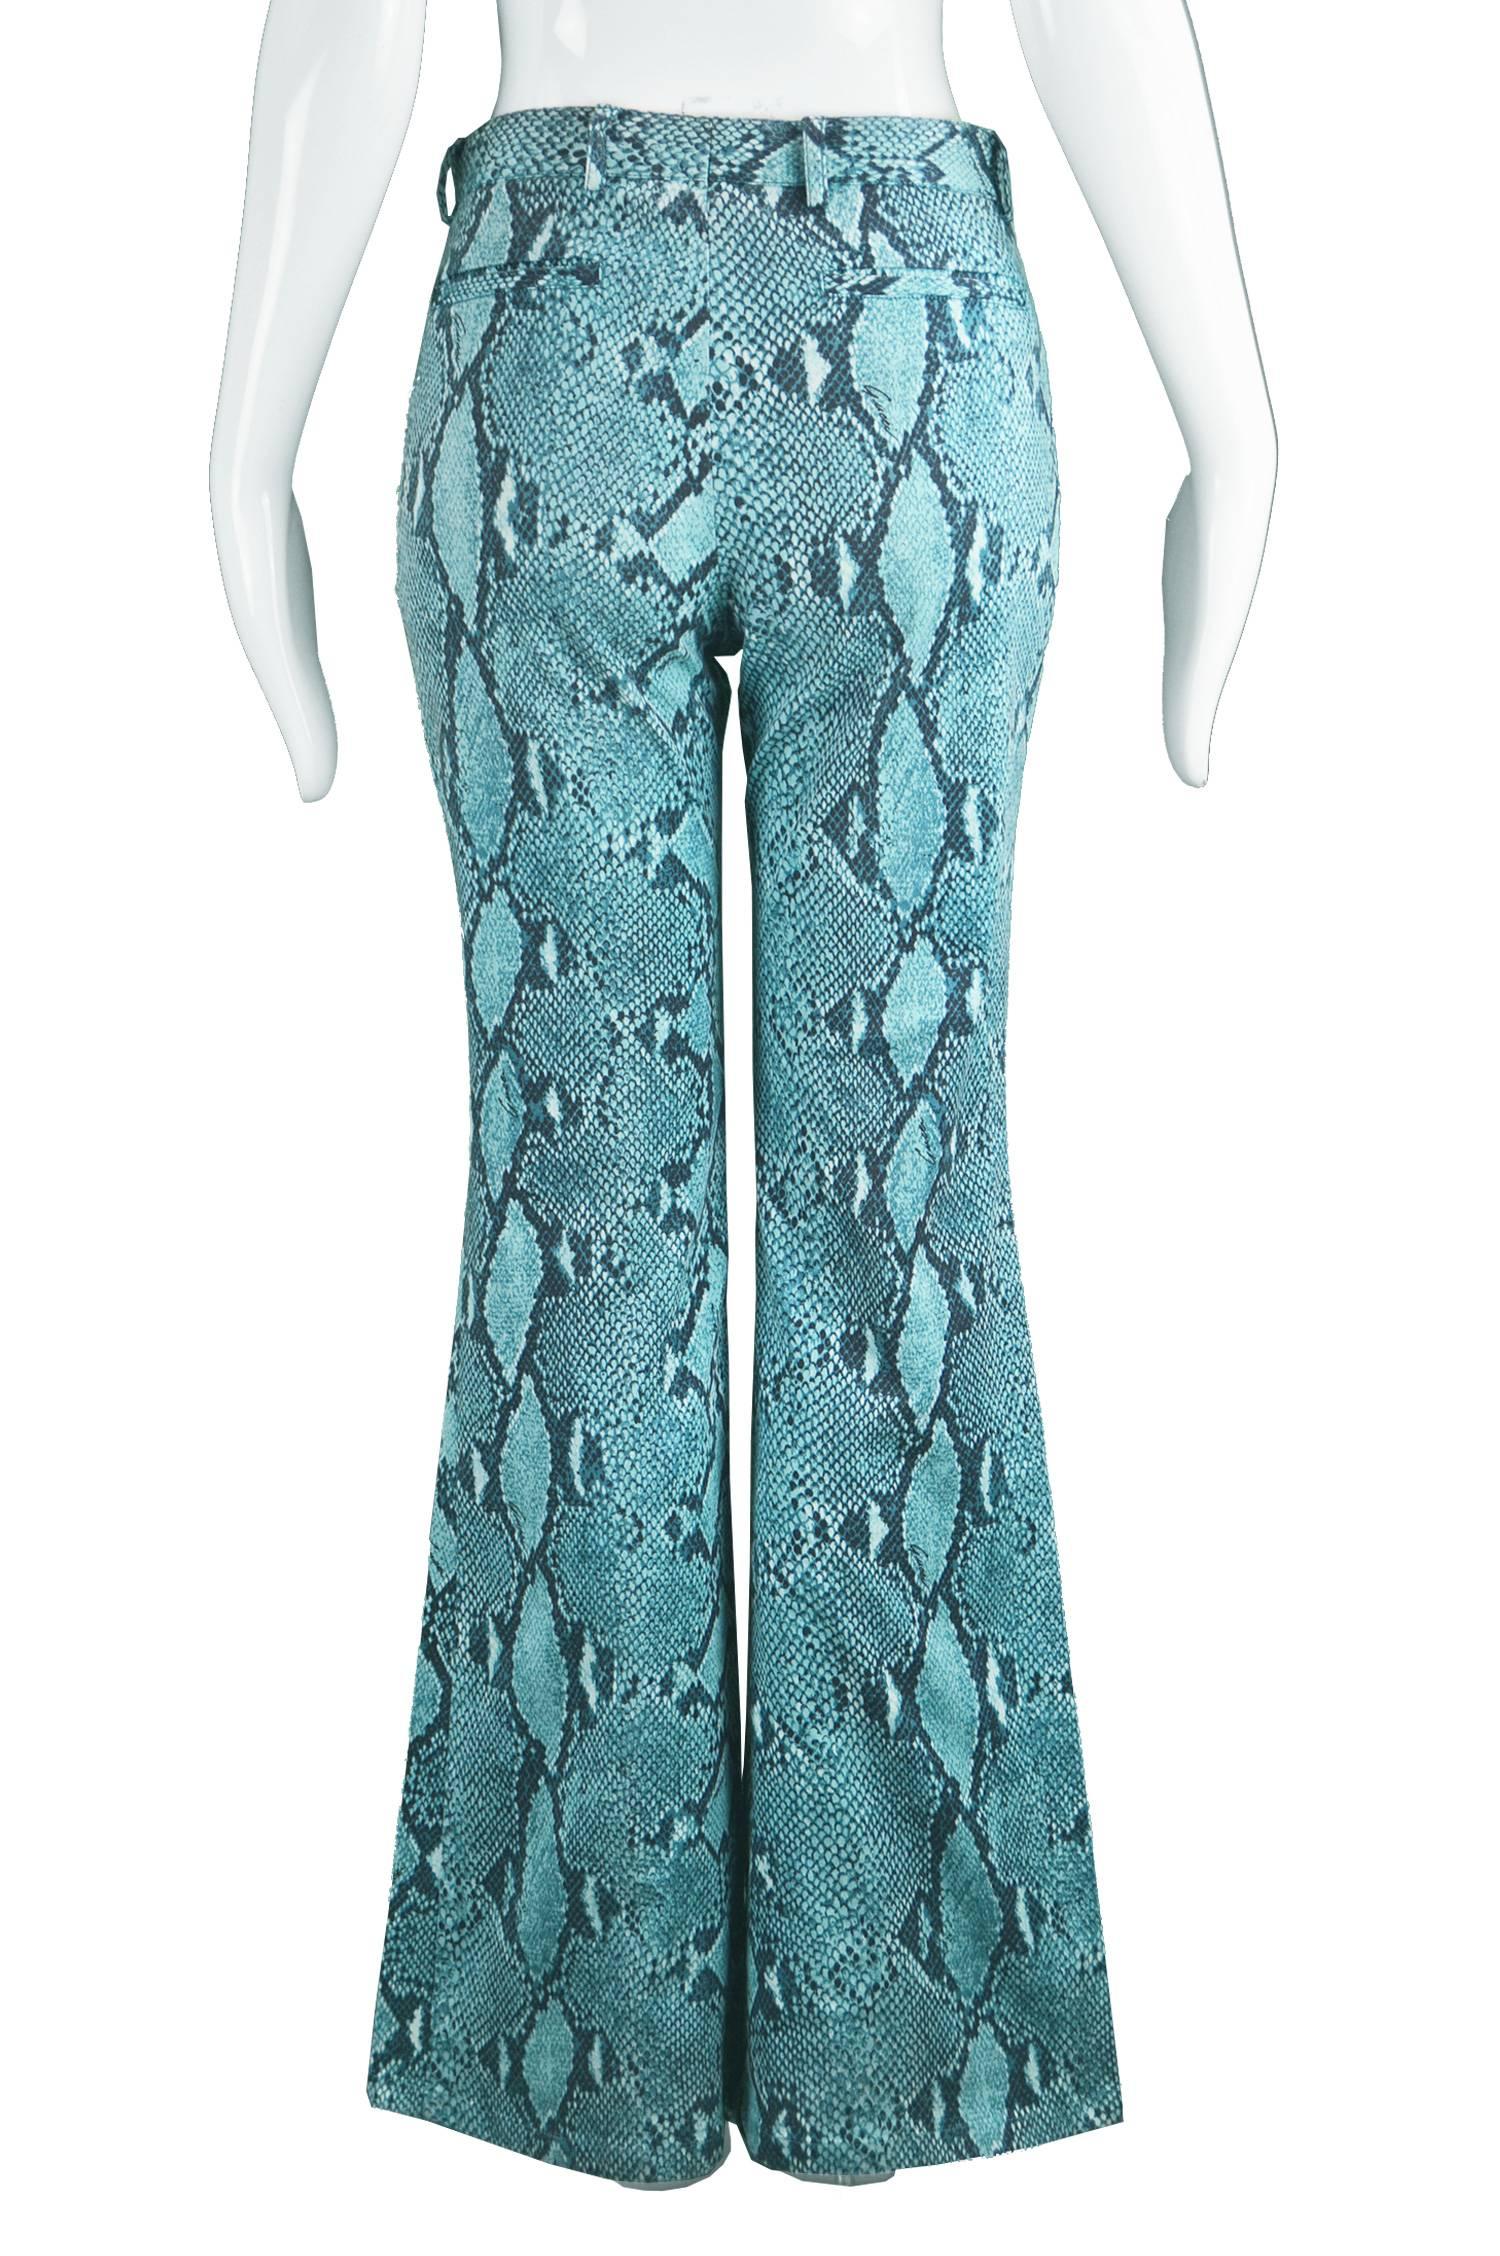 Tom Ford for Gucci Blue Cotton Snakeskin Print Flared Pants, Spring 2000 For Sale 2